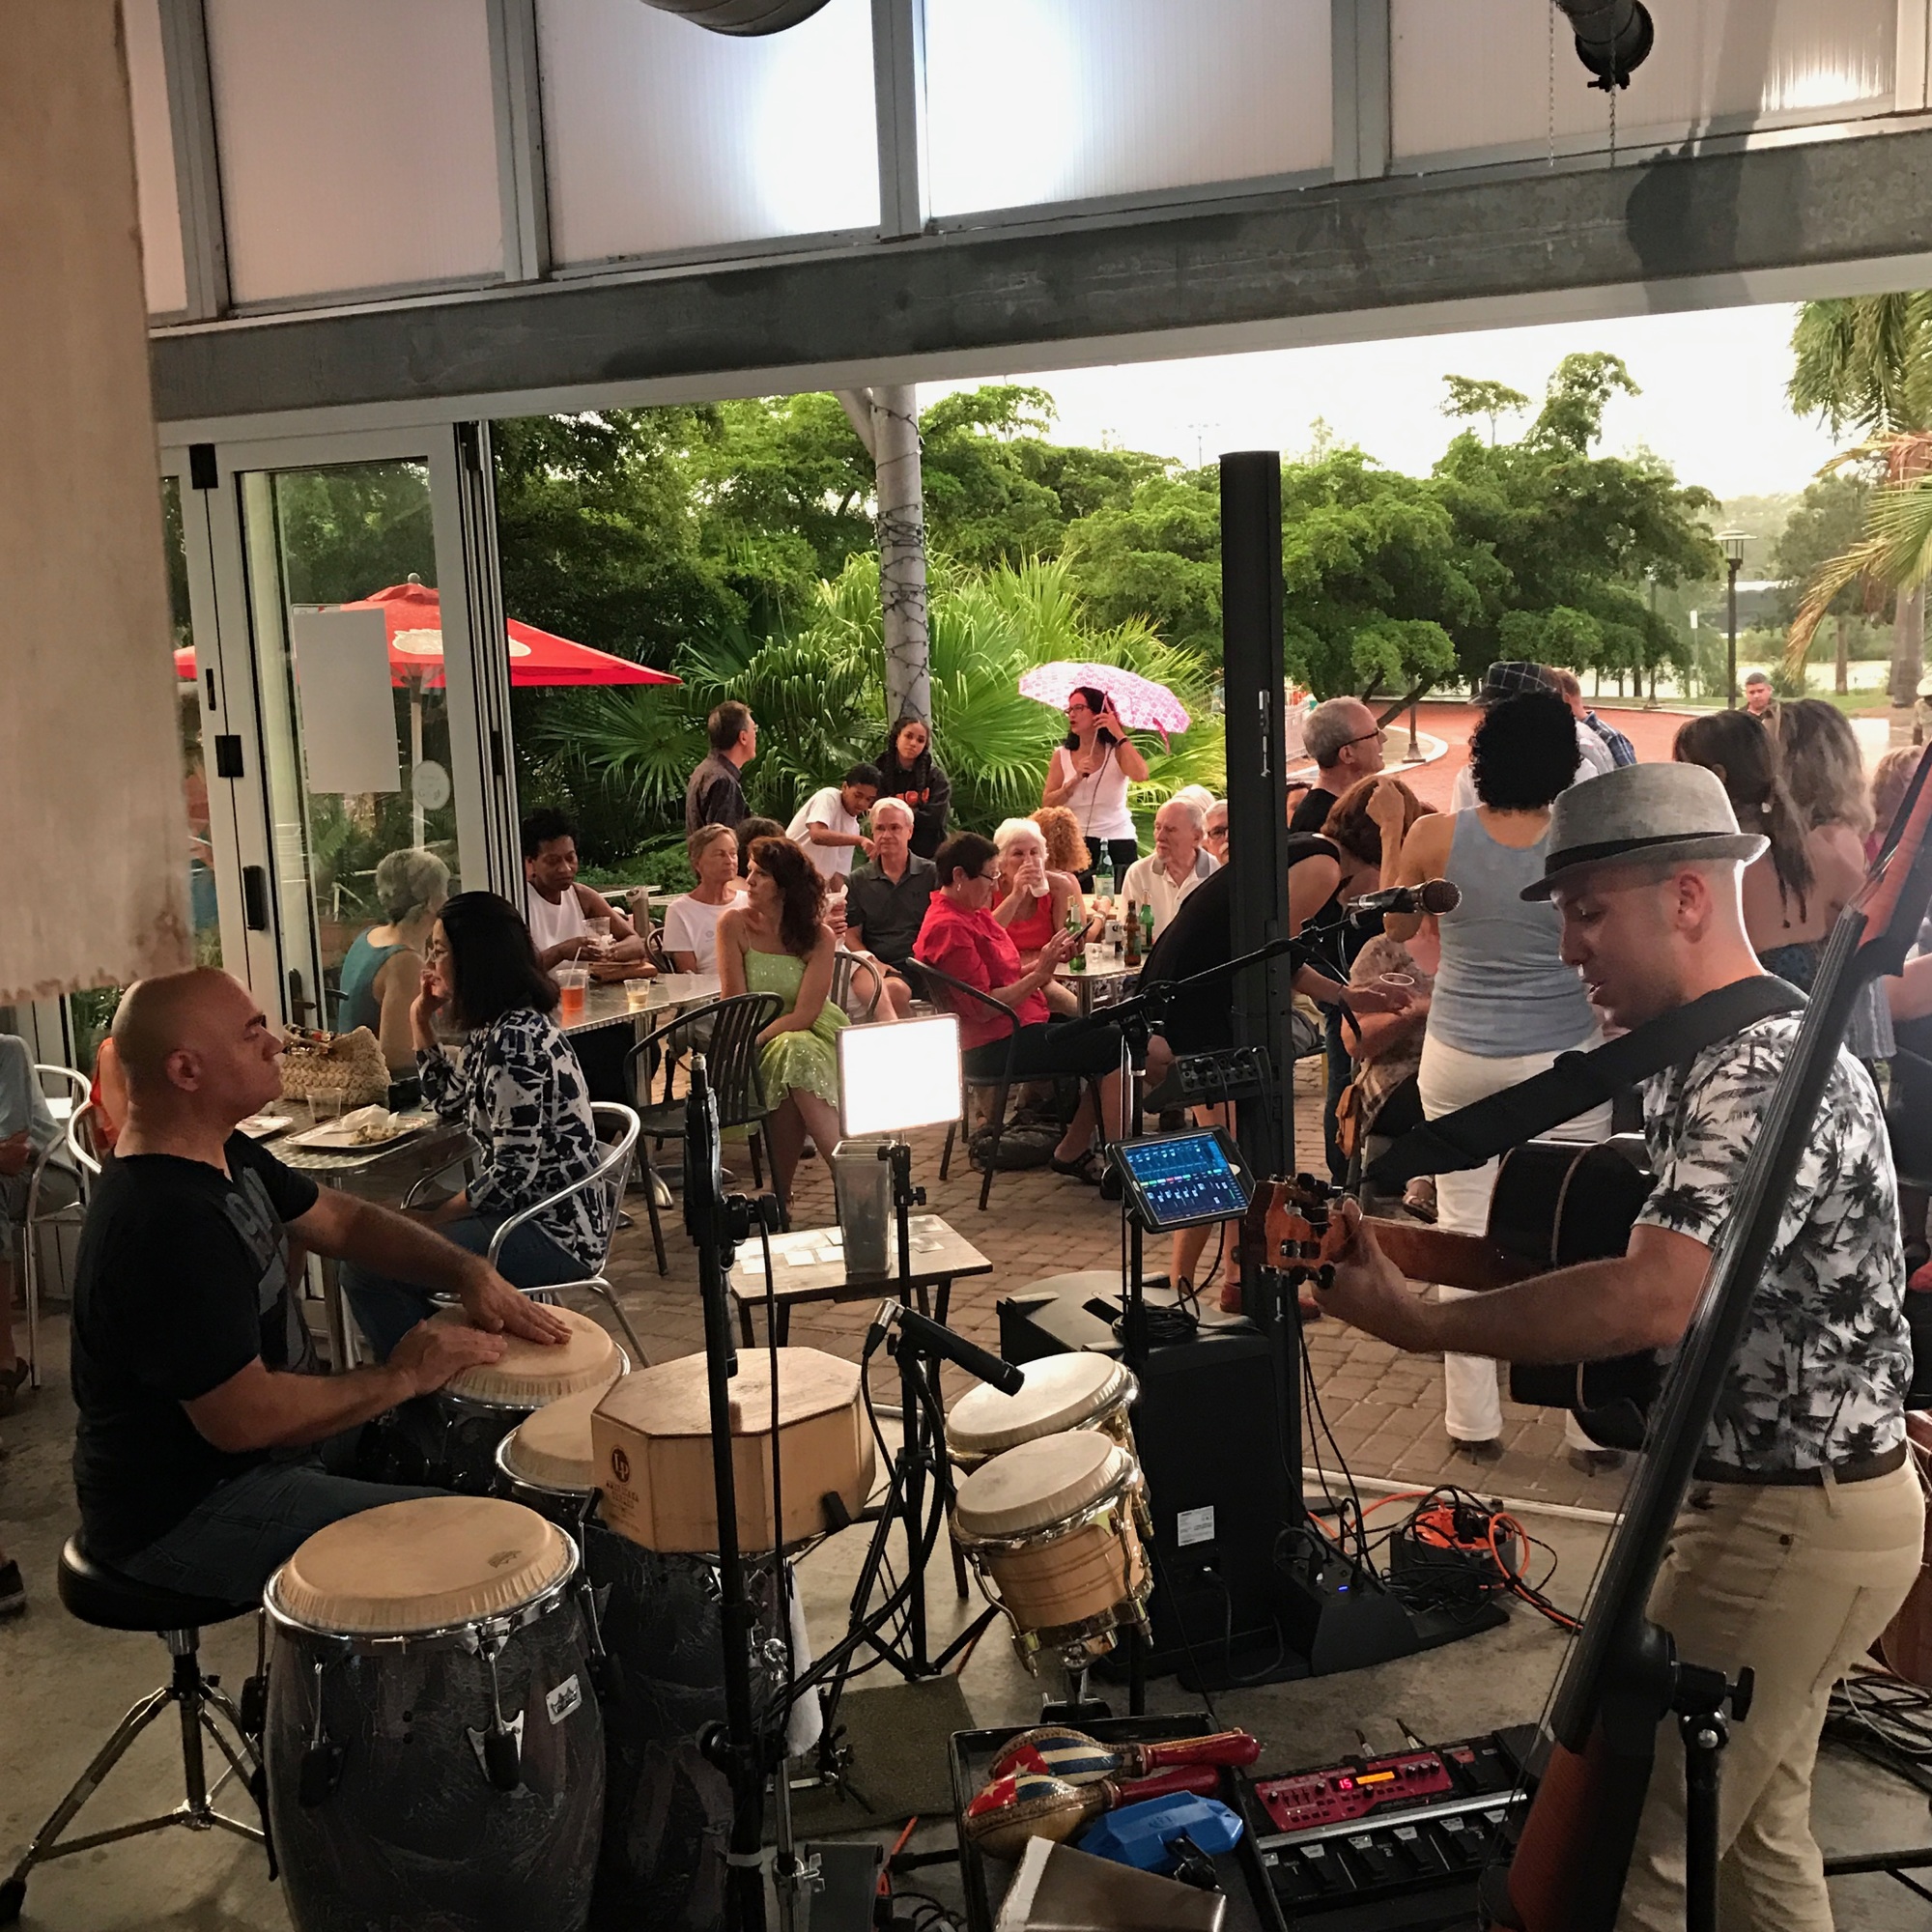 Live music is an indoor/outdoor experience at Café in the Park. Courtesy photo